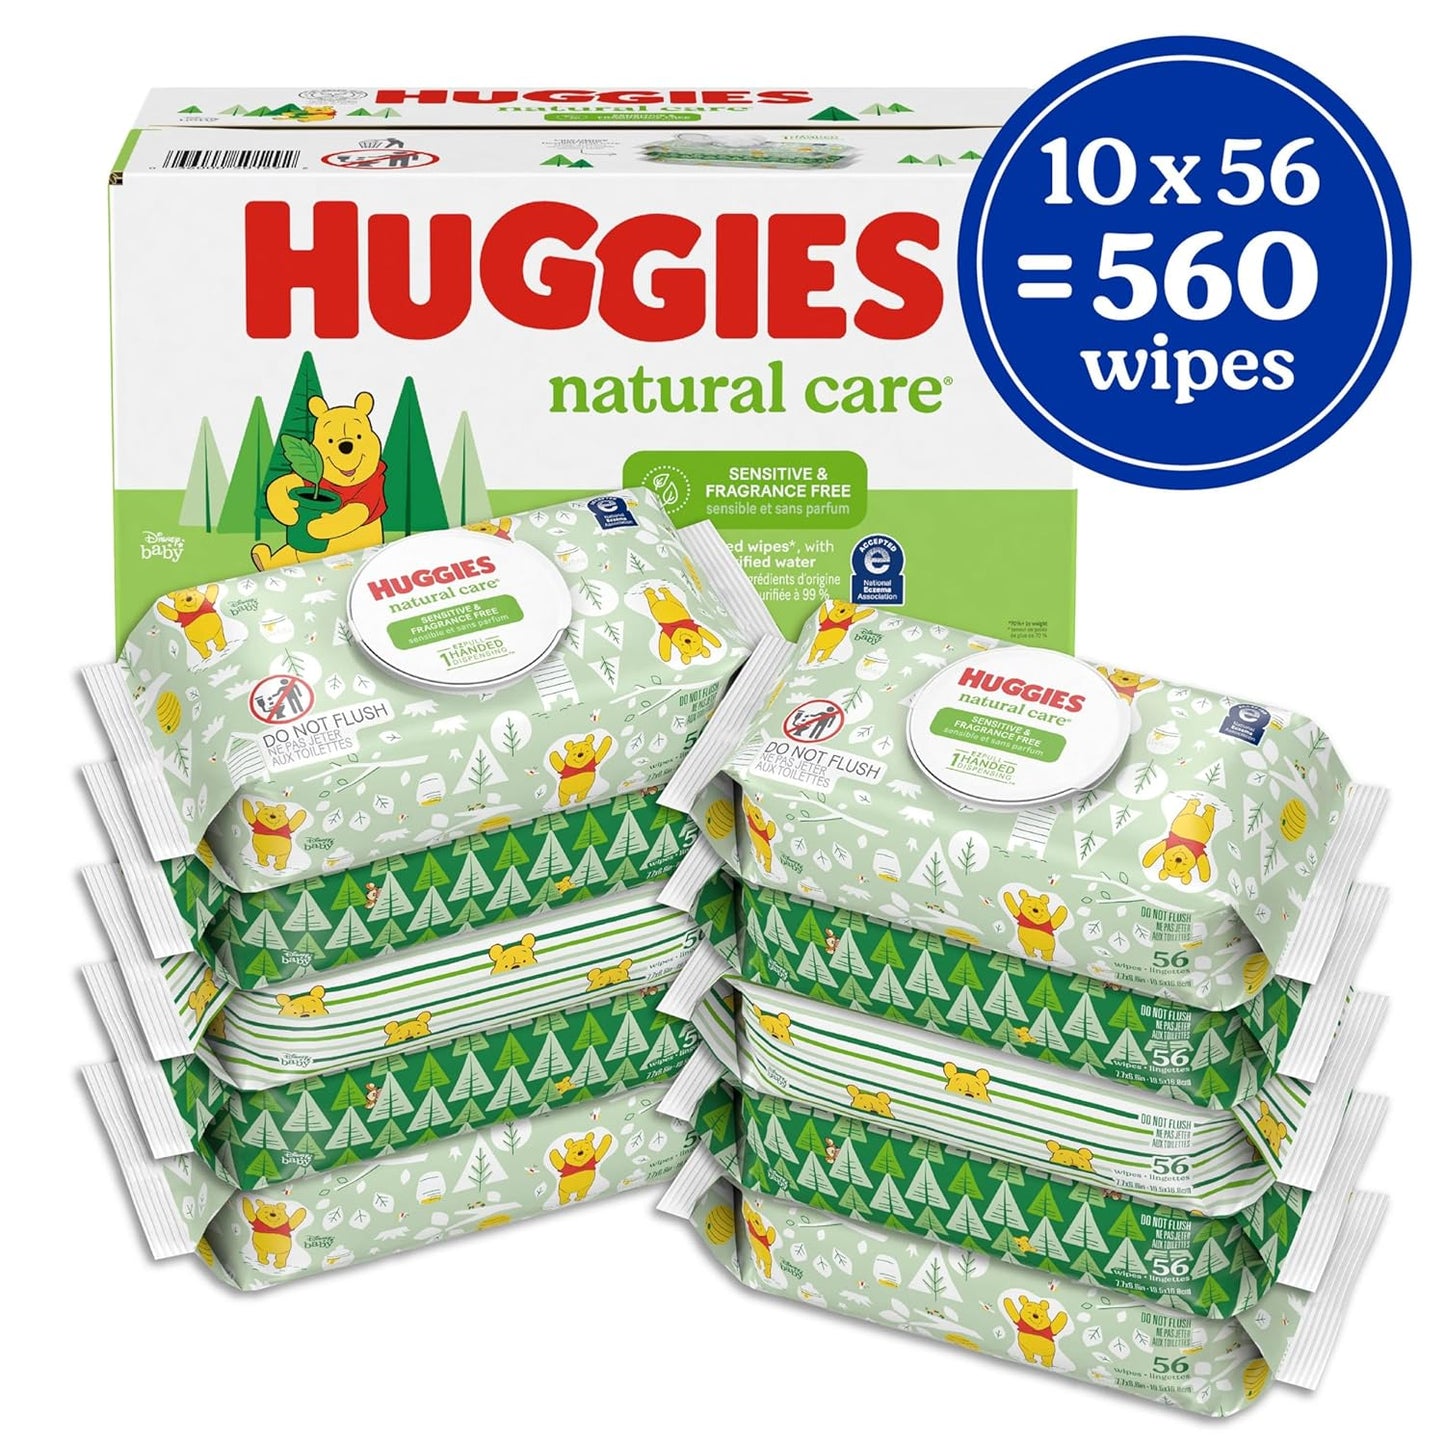 Huggies Natural Care Sensitive Baby Wipes, Unscented, Hypoallergenic, 99% Purified Water, 12 Flip-Top Packs (768 Wipes Total), Packaging May Vary